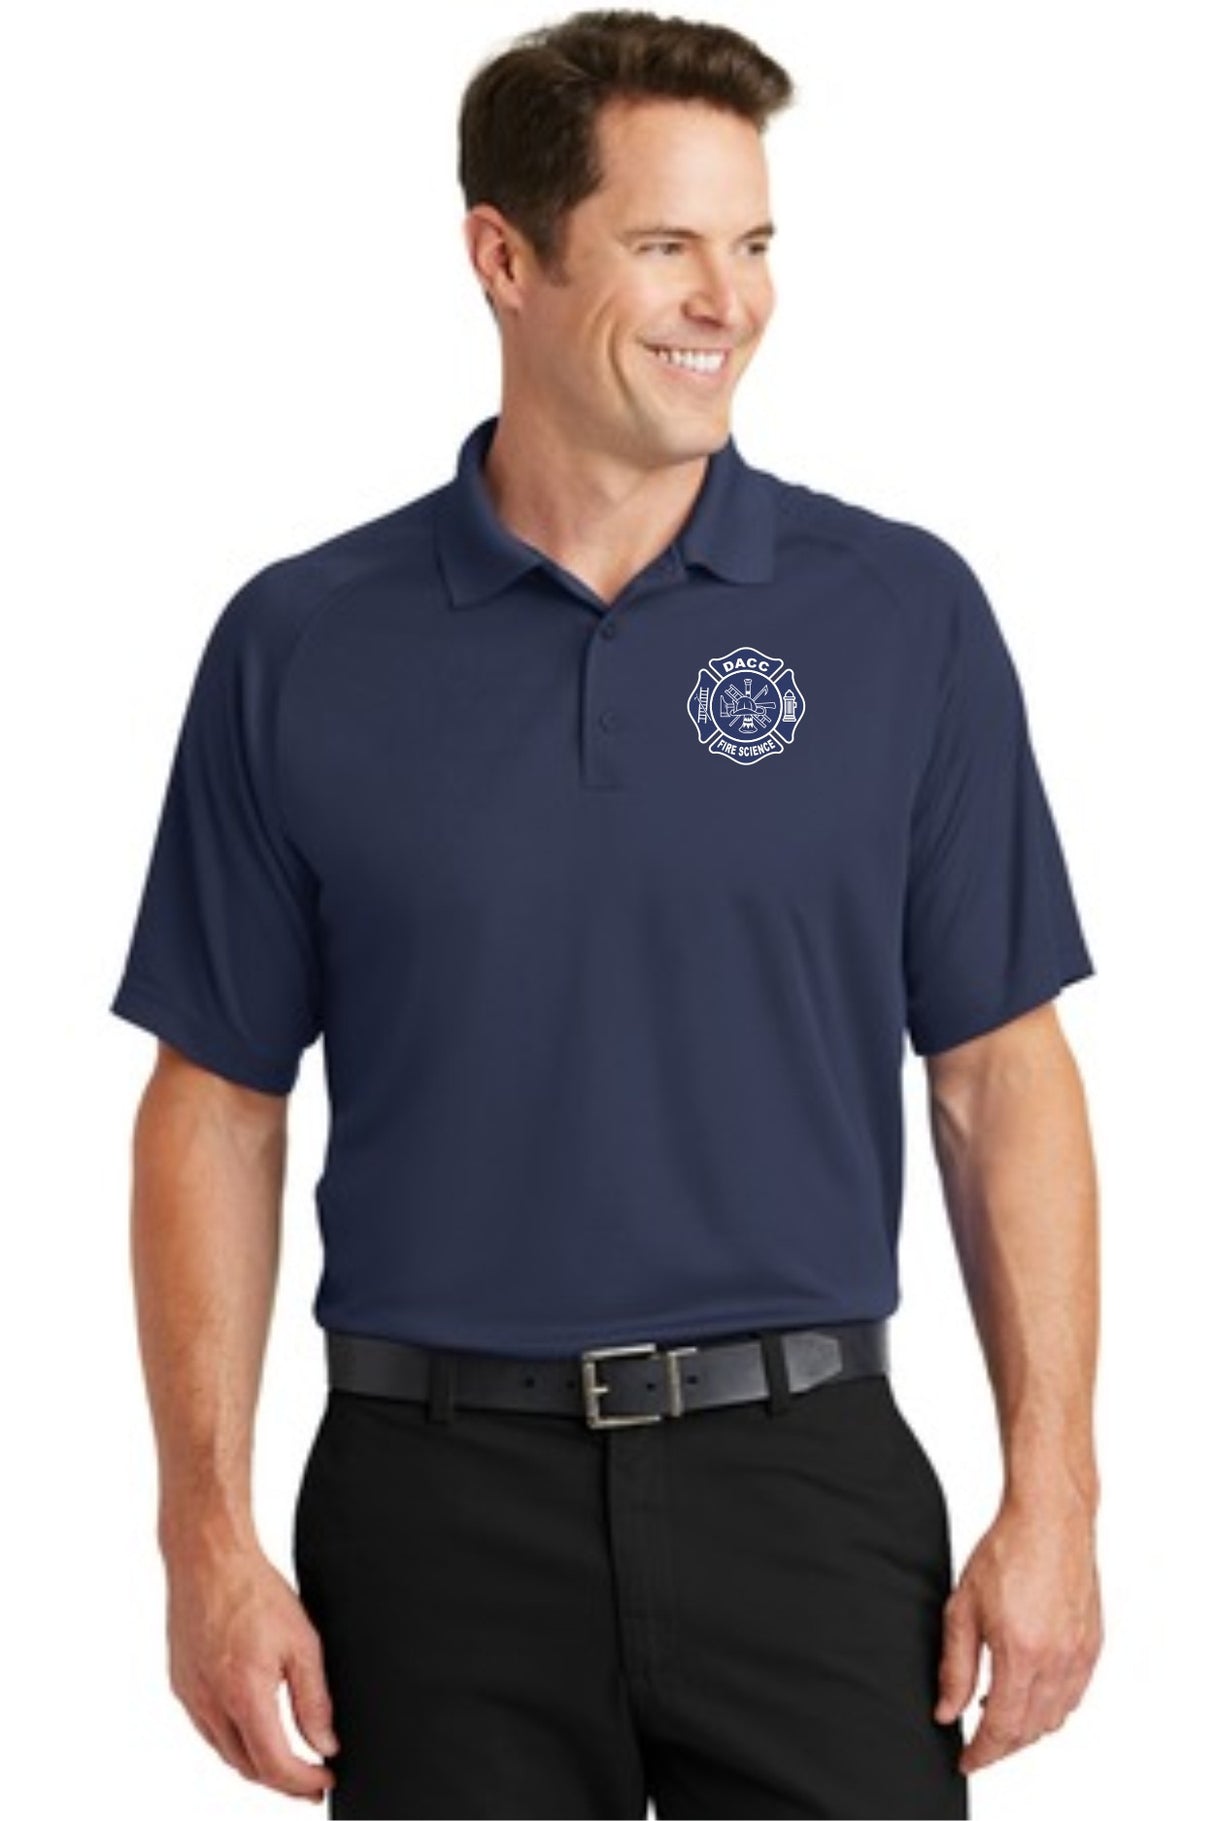 DACC Fire Science Performance Polo